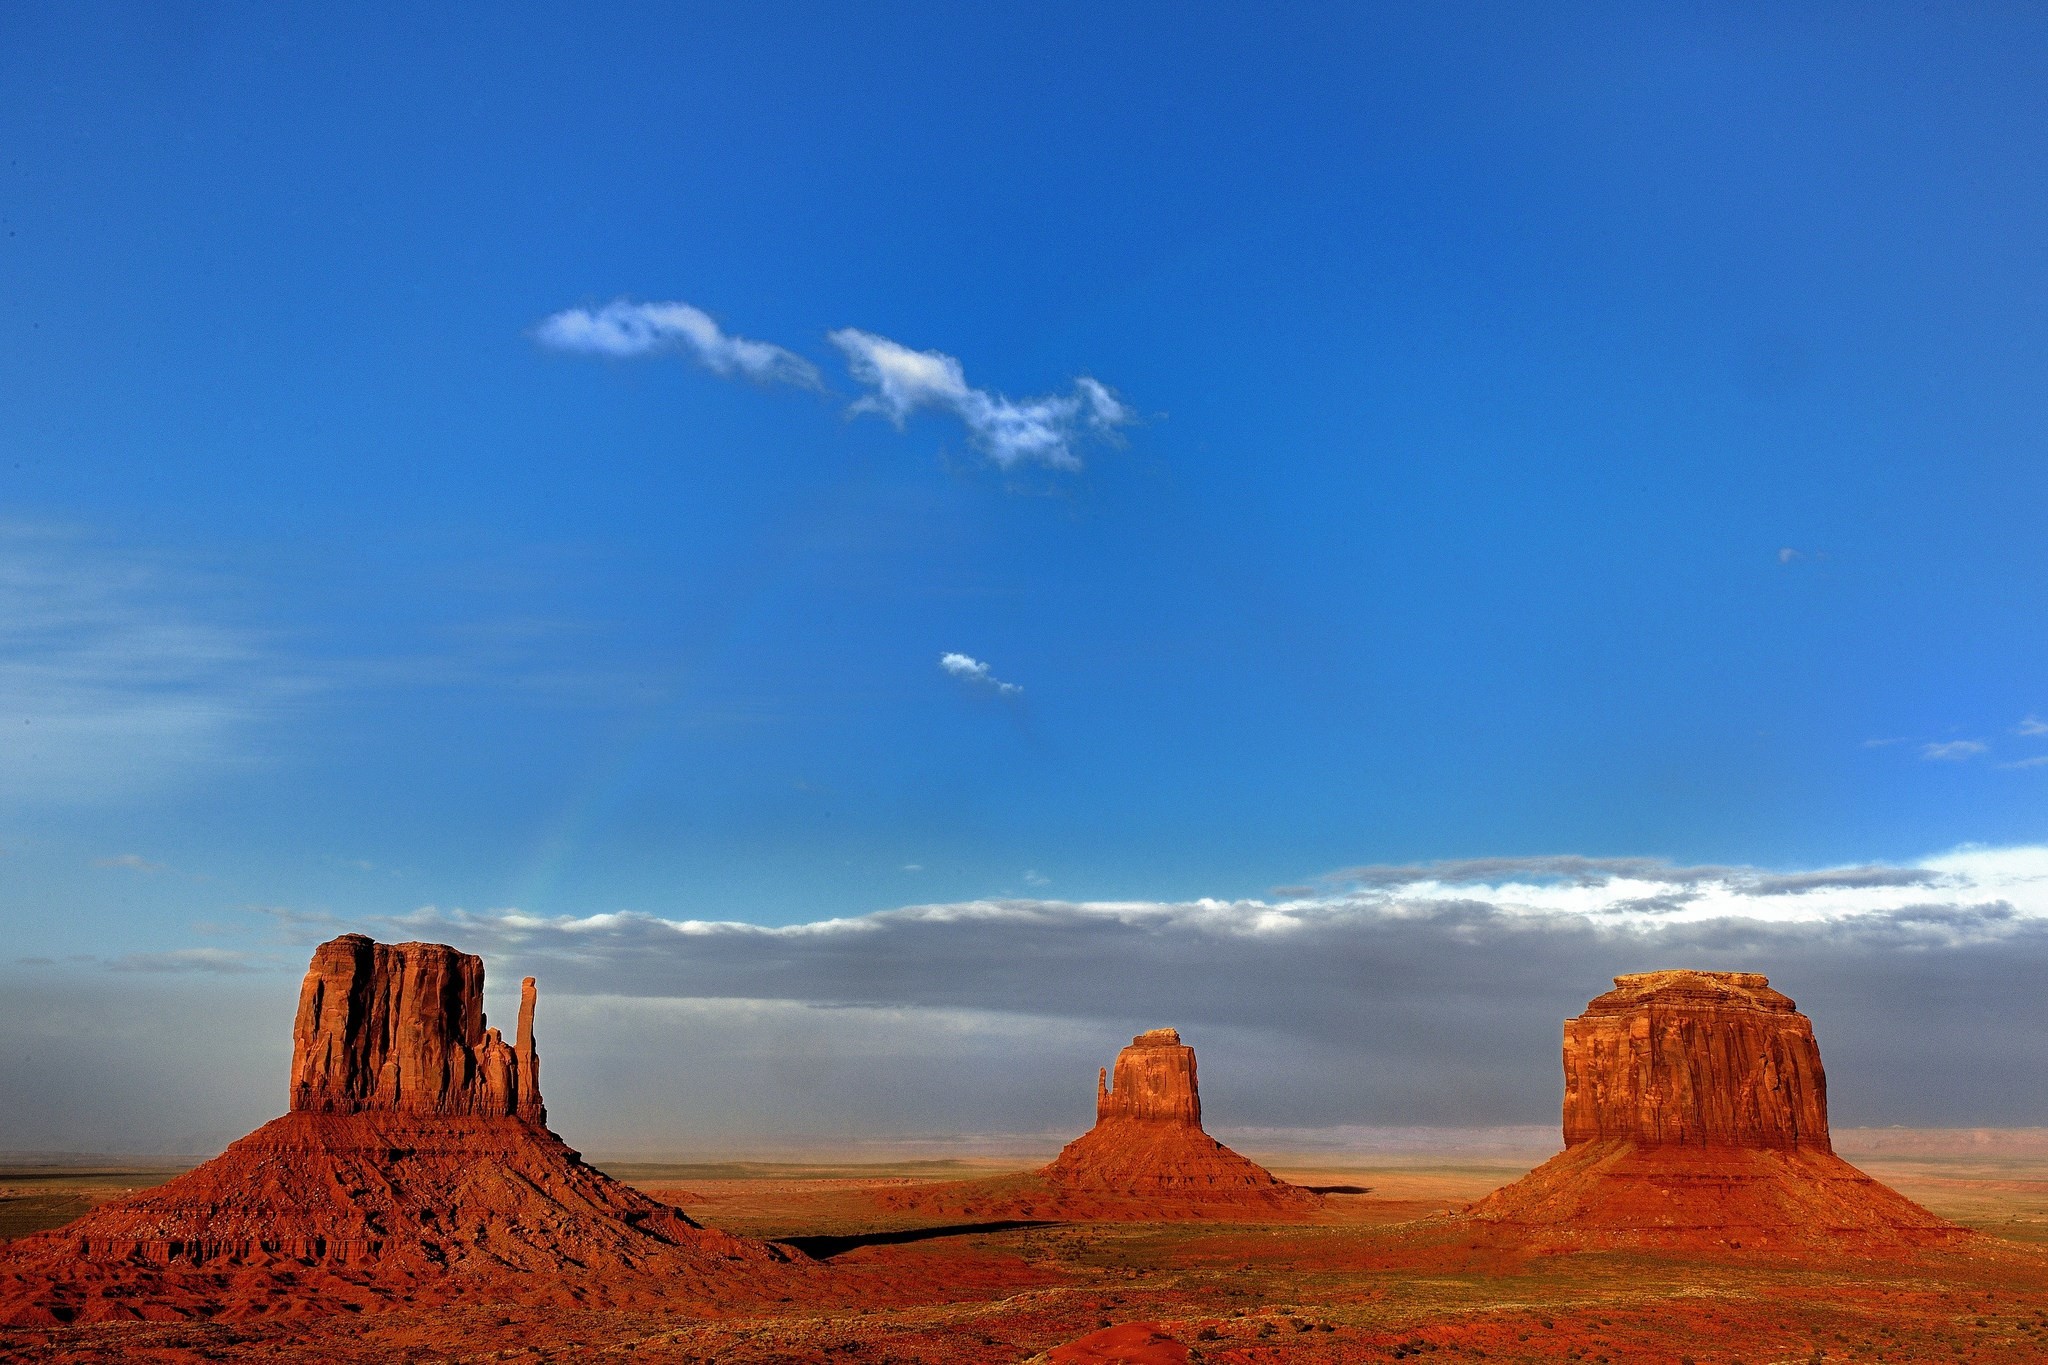 2048x1365 computer wallpaper for monument valley - monument valley category